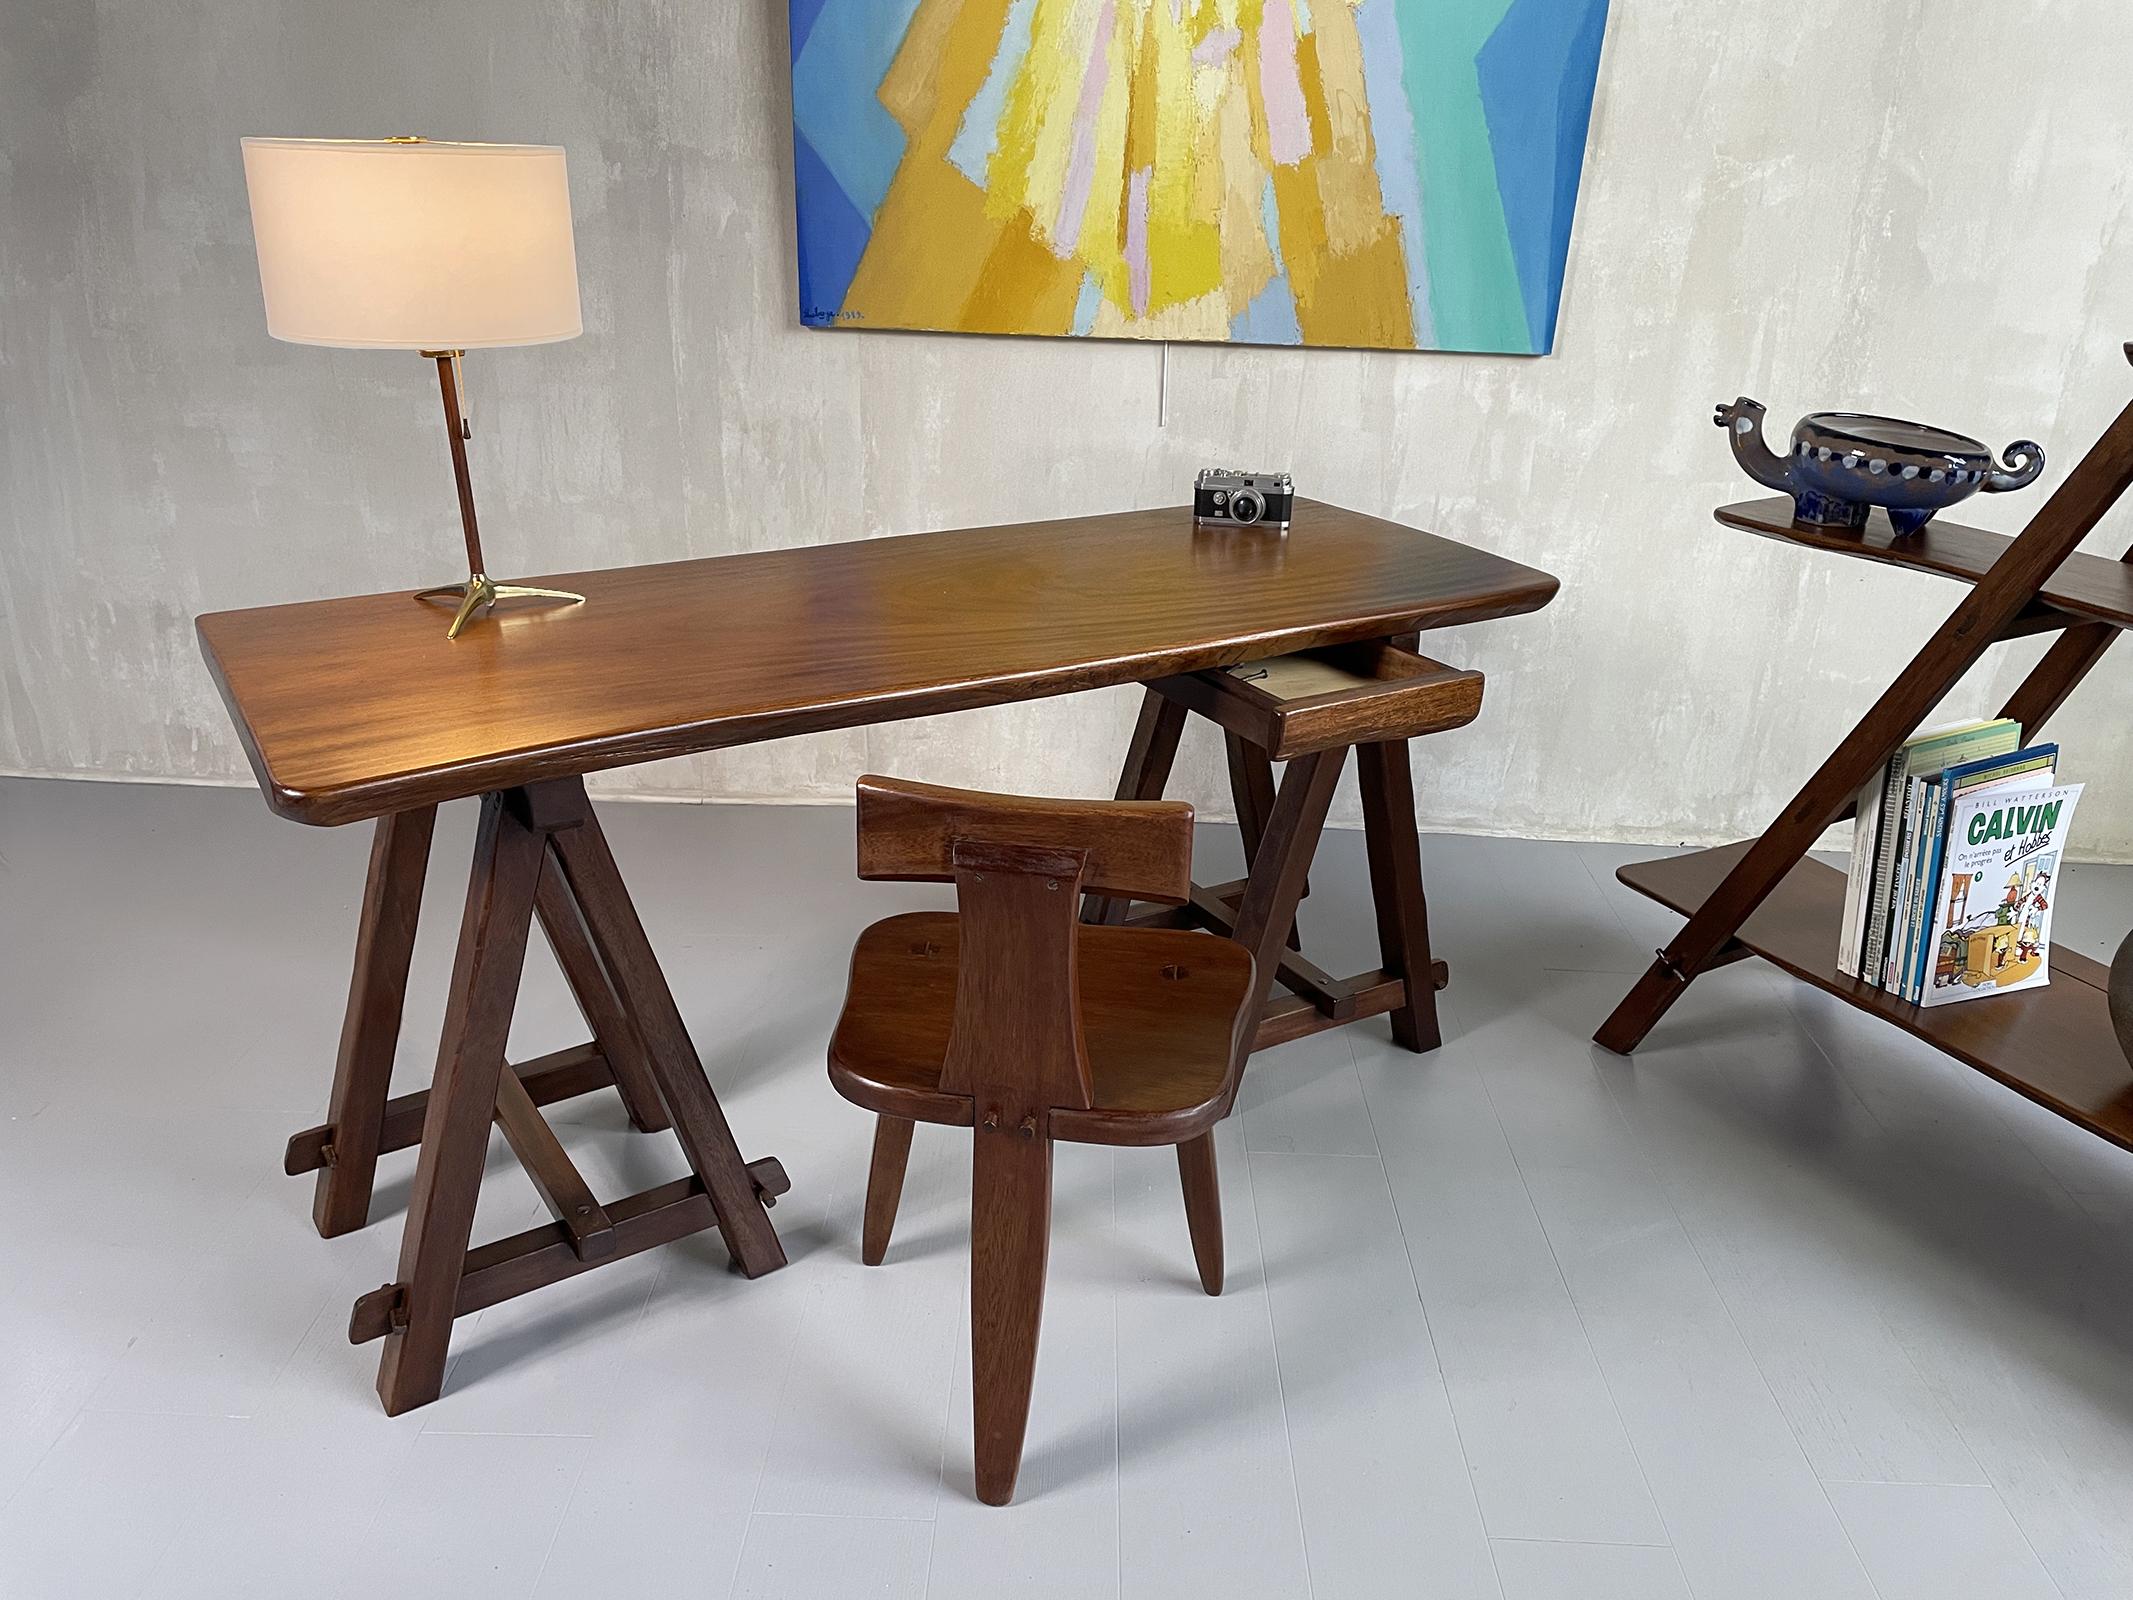 Desk, bookcase and tripod chair in solid mahogany, Circa 1960.
The trestle desk has a 5 cm thick top, a drawer is placed on the right. The bookcase is made up of ladder uprights on which three asymmetrical shelves rest.
The furniture designer has